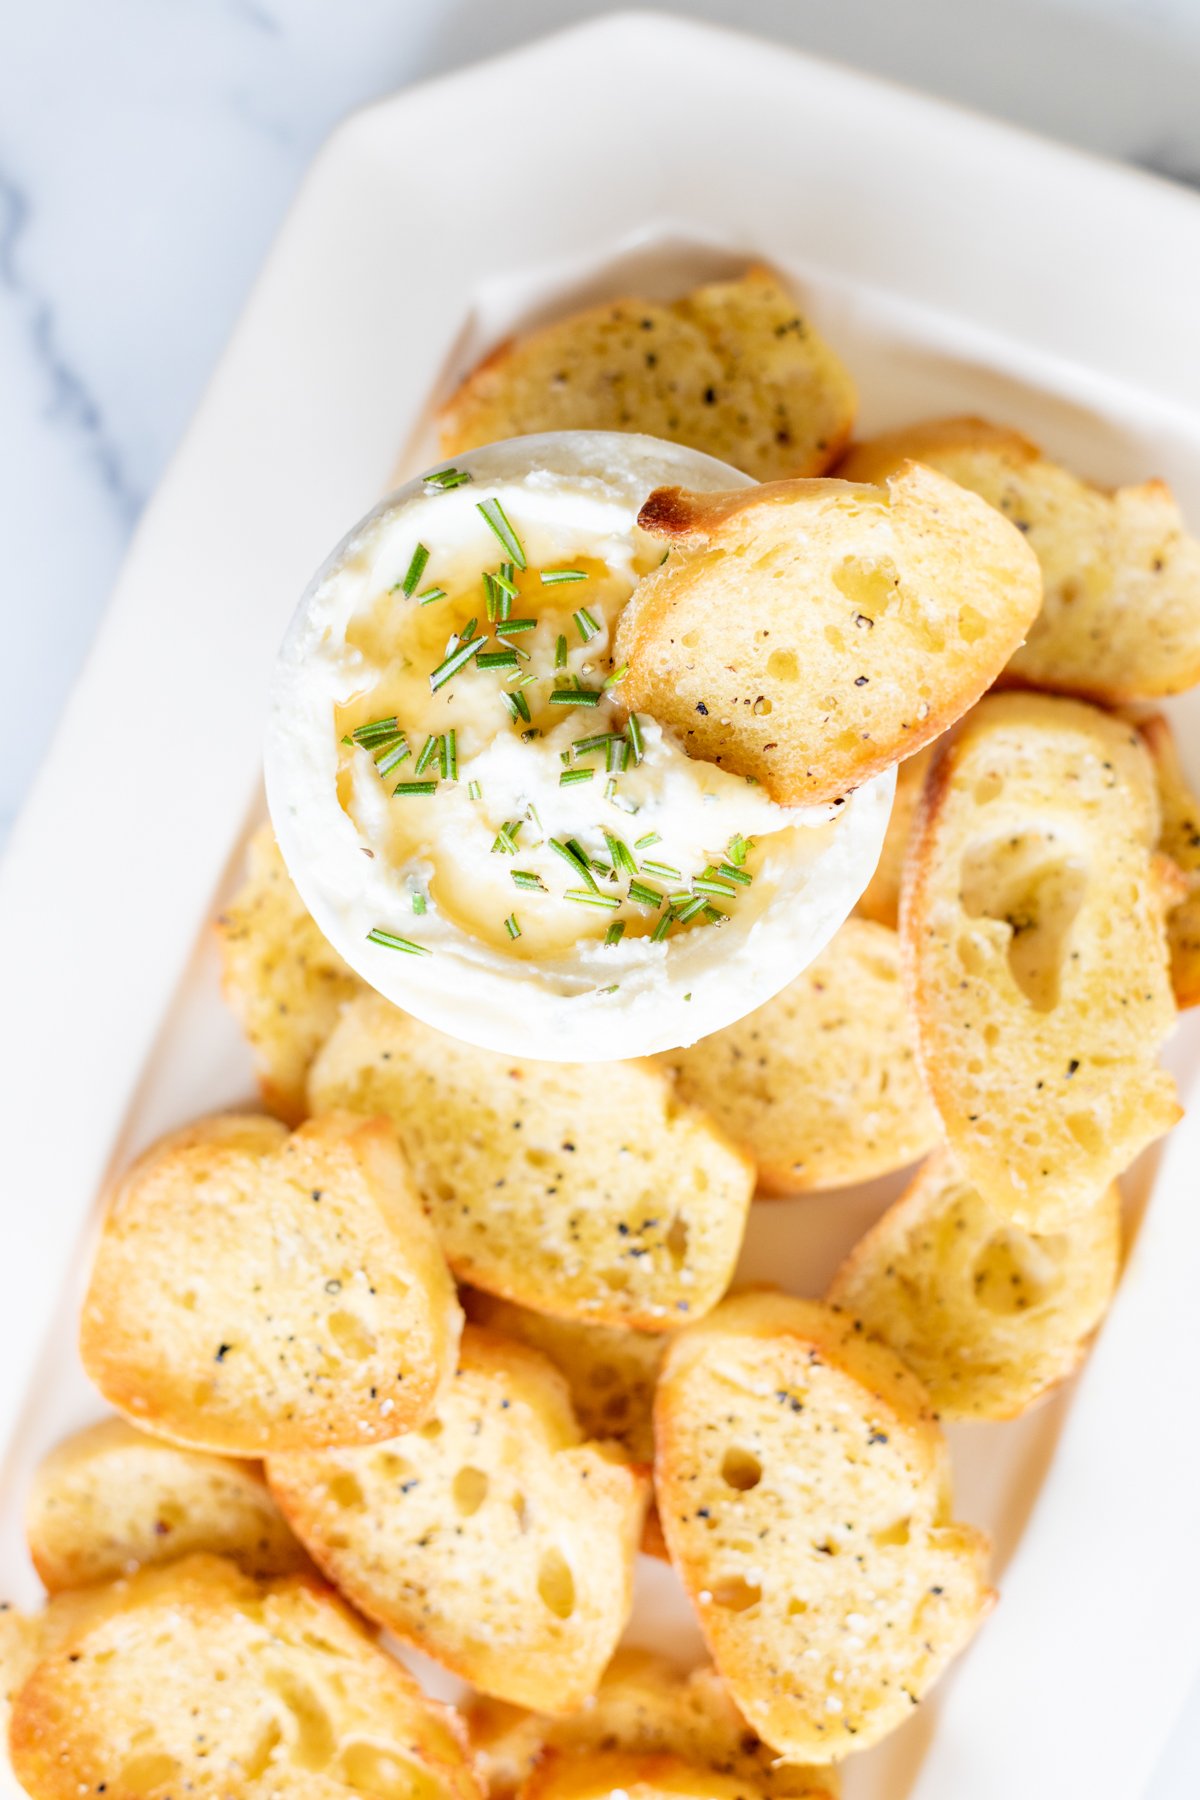 A plate of toasted crostini surrounds a bowl of creamy dip garnished with herbs. One bread slice is dipped into the bowl.